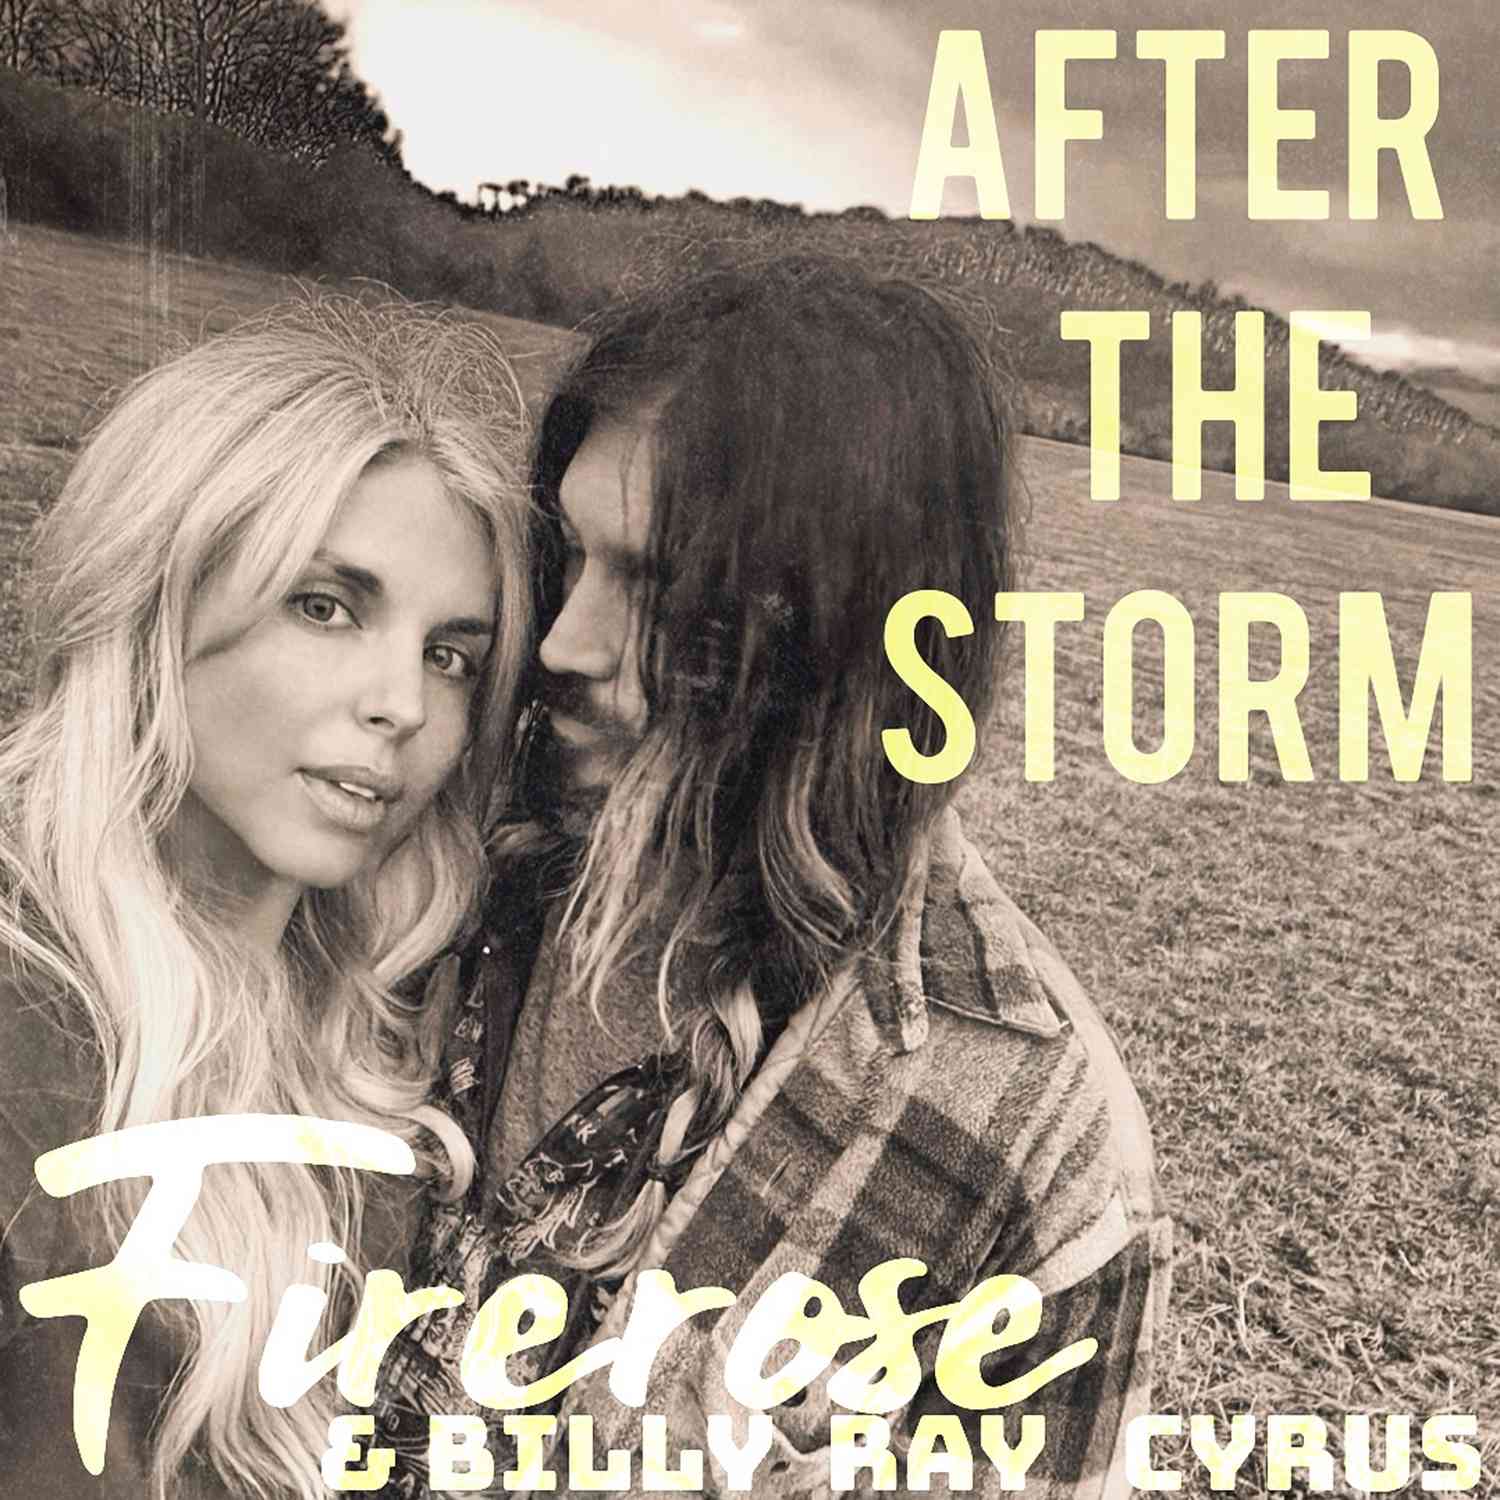 Billy Ray Cyrus New Song 'After The Storm'